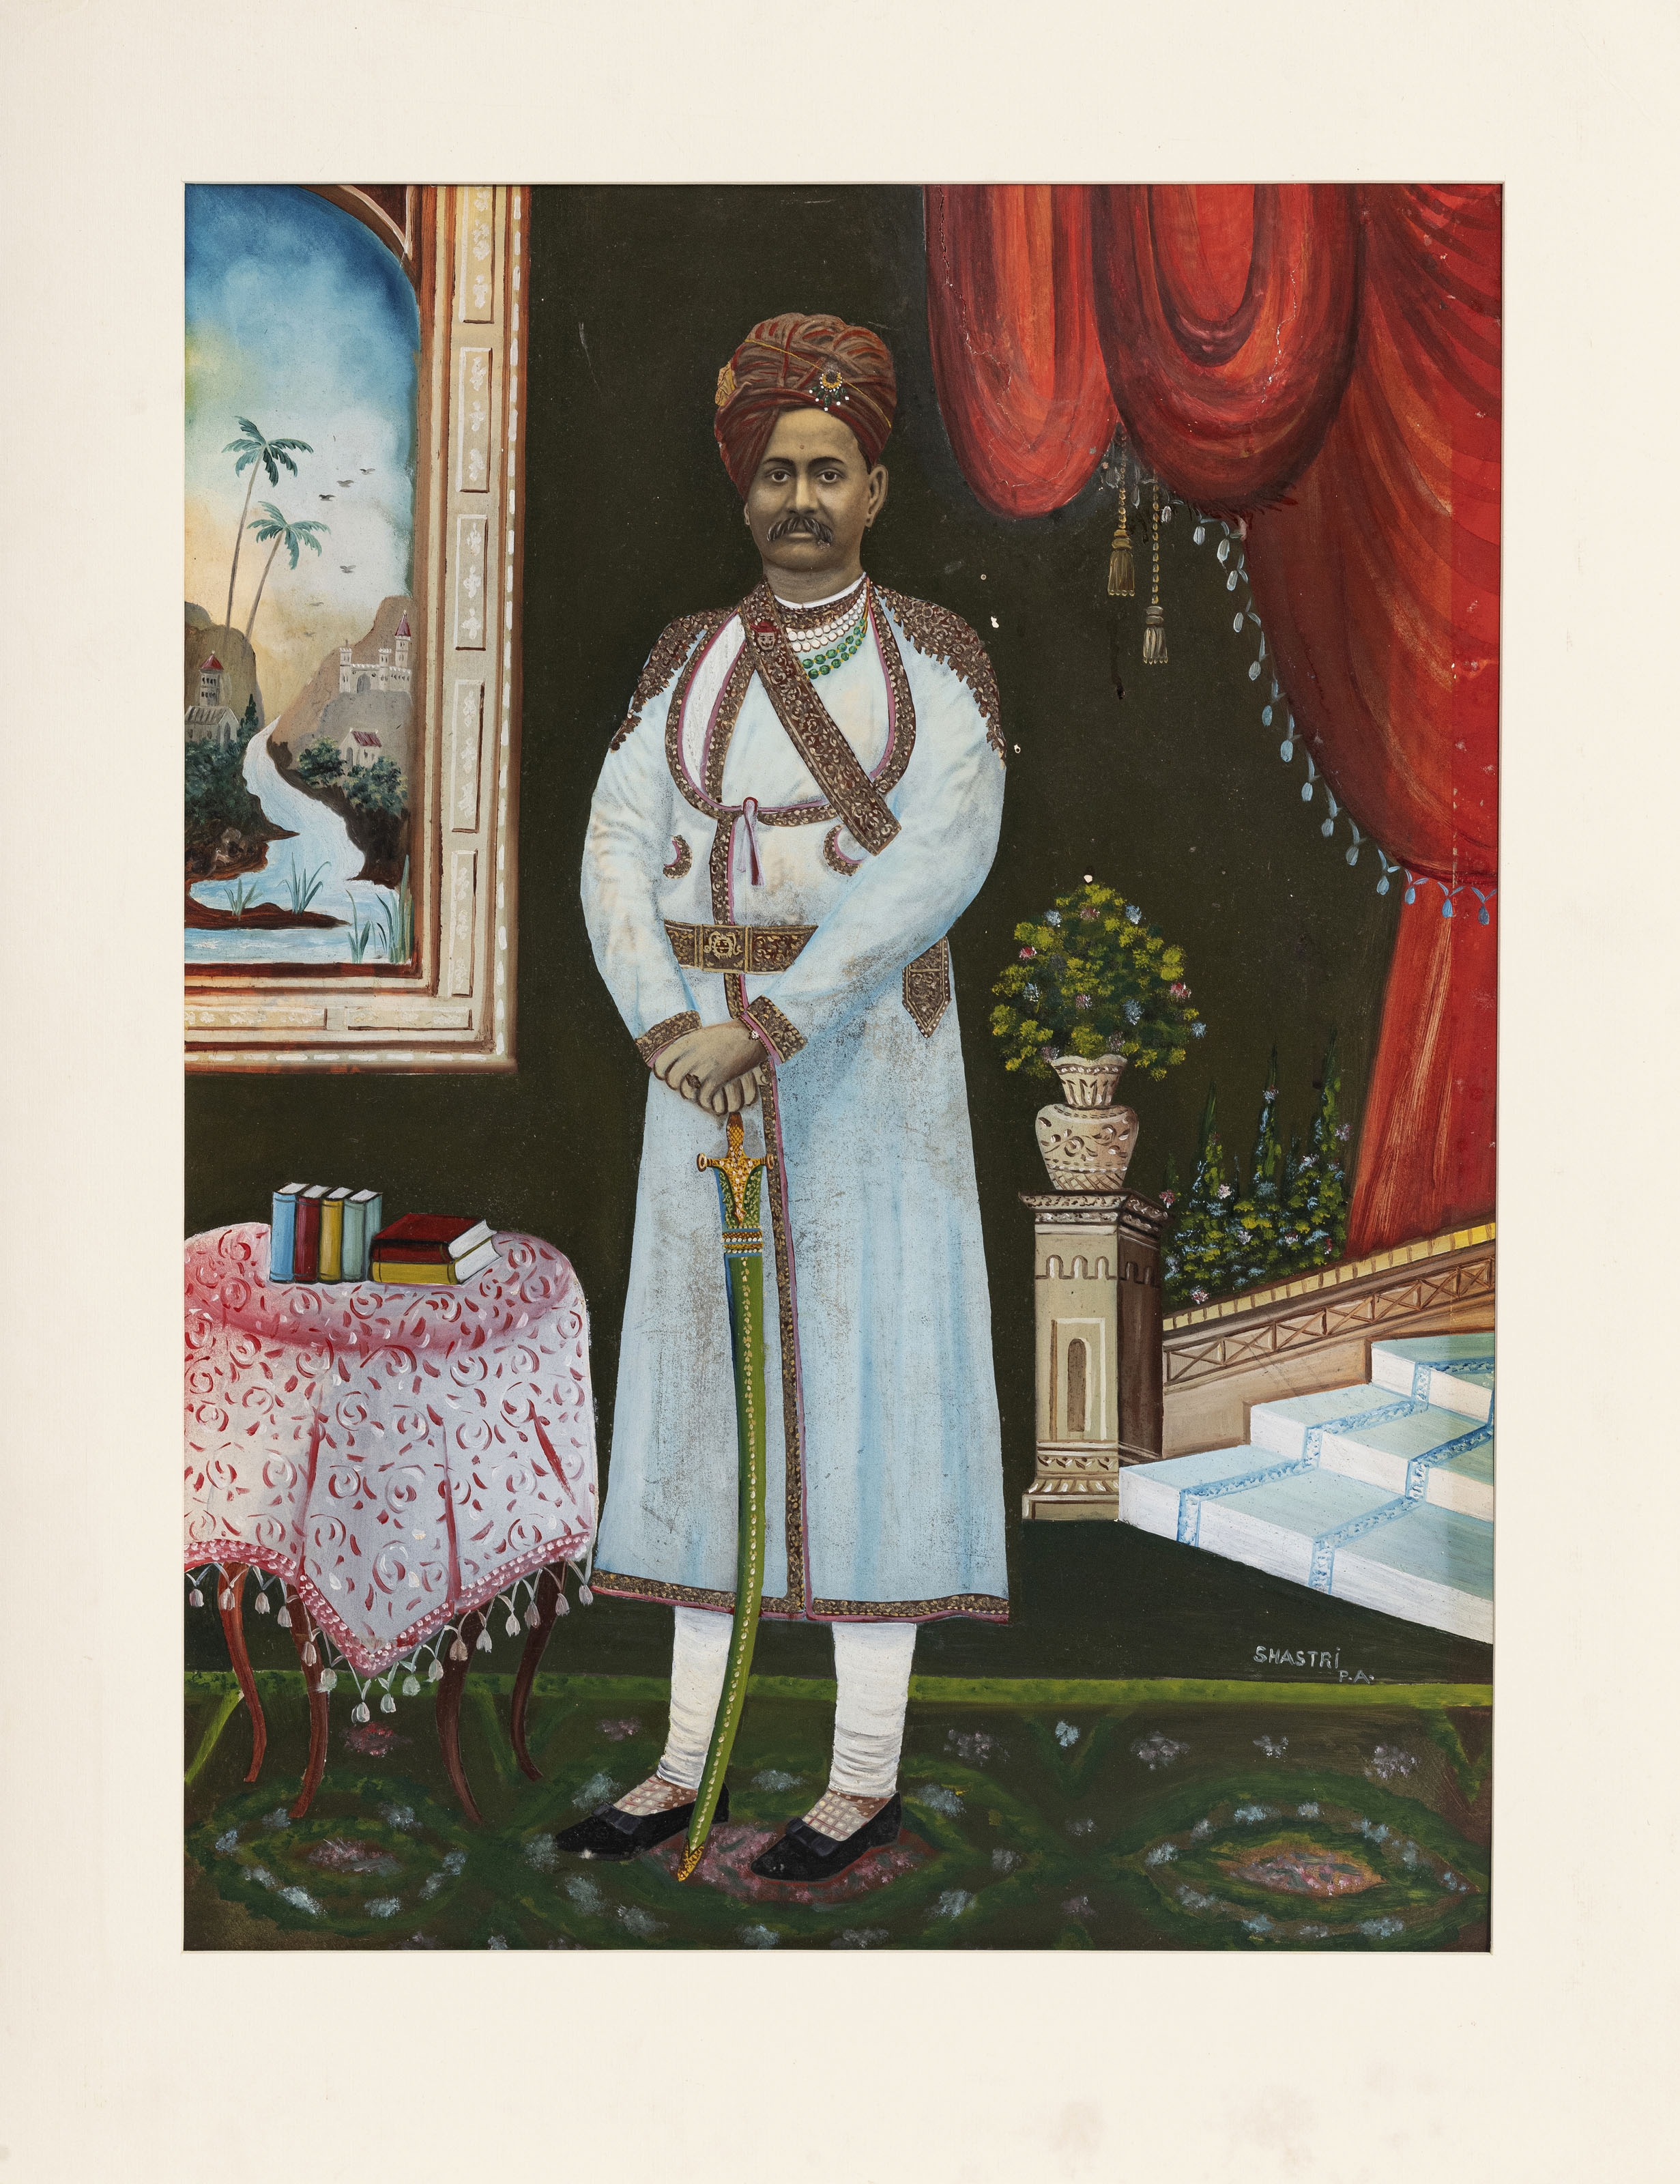 Portrait of a Maharaja from Western India